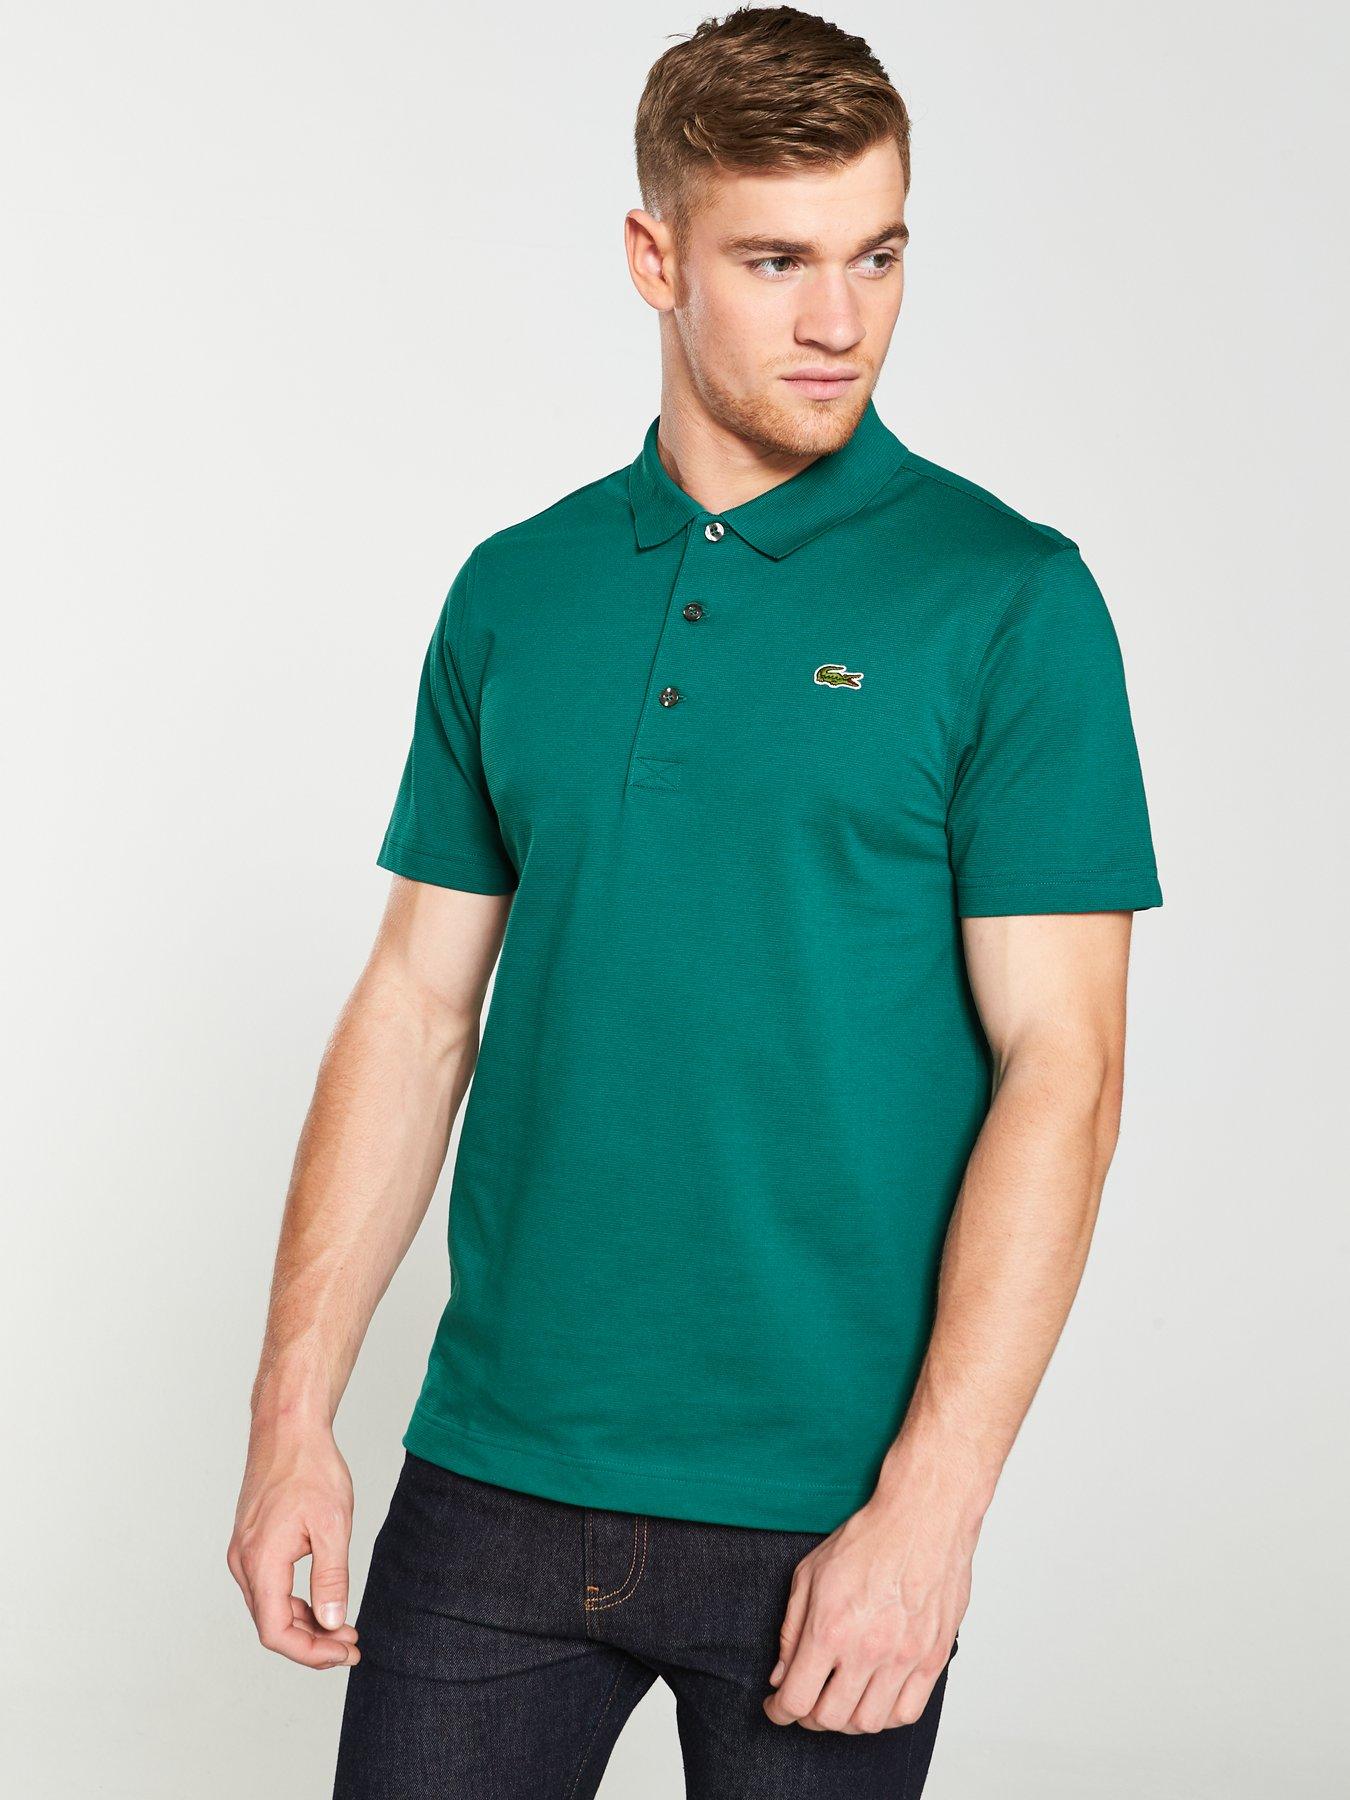 lacoste clearance uk